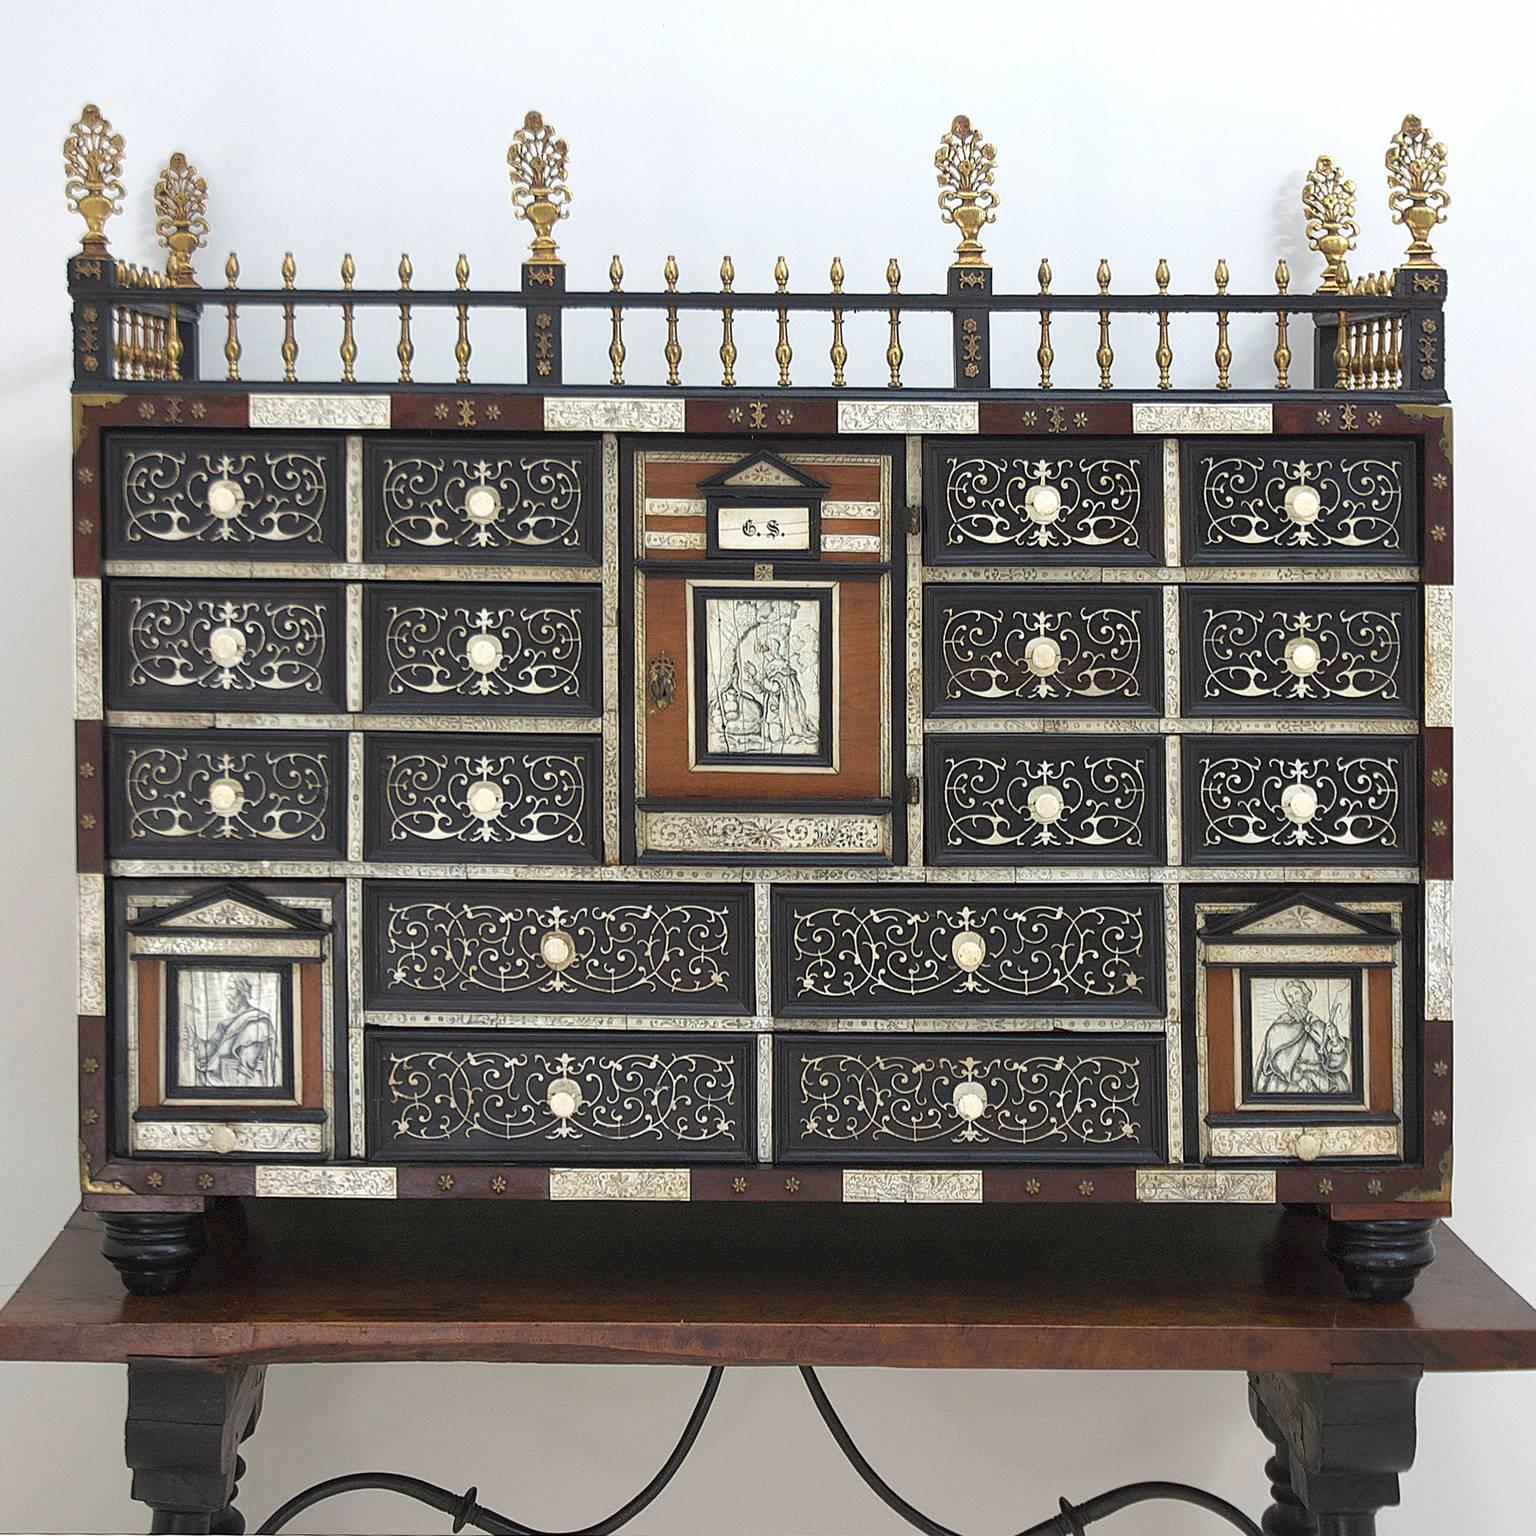 18th century Spanish-Italian bone and ebonized Vargueño seated on a traditional turned ebonized base with walnut top and wrought iron supports. 
The Vargueño table and chest originated in Bargas Spain in the provence of Toledo and is the most